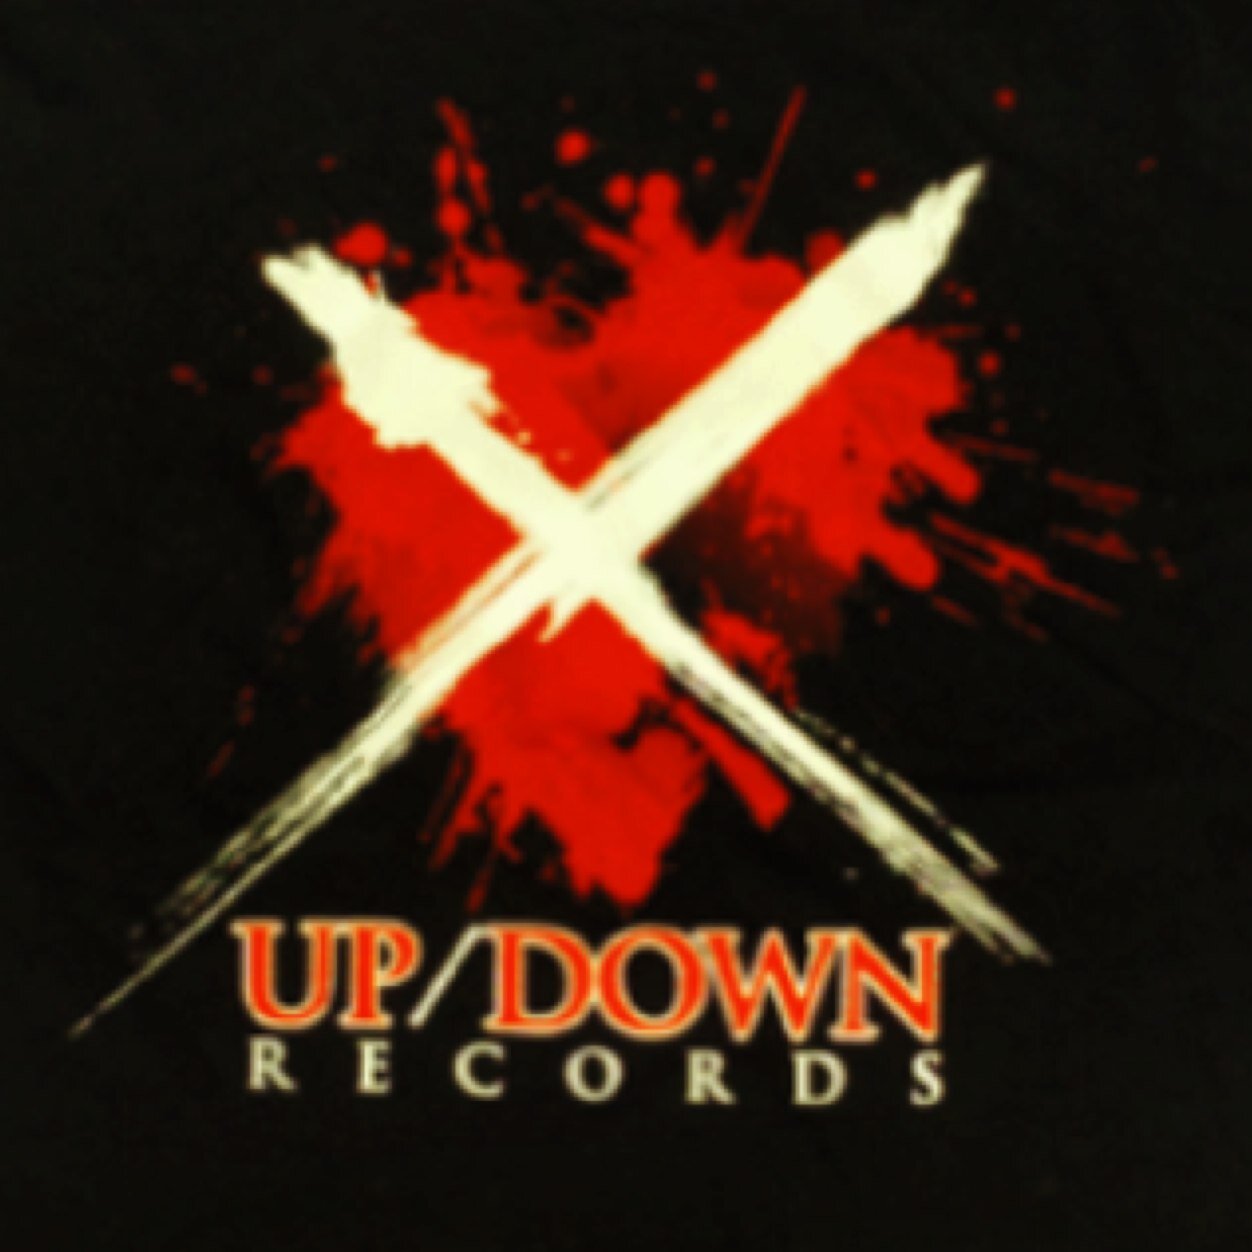 Official twitter page of UP/DOWN Records. Record label for @blueoctober and @justin_5591 new album ( HOME ) available